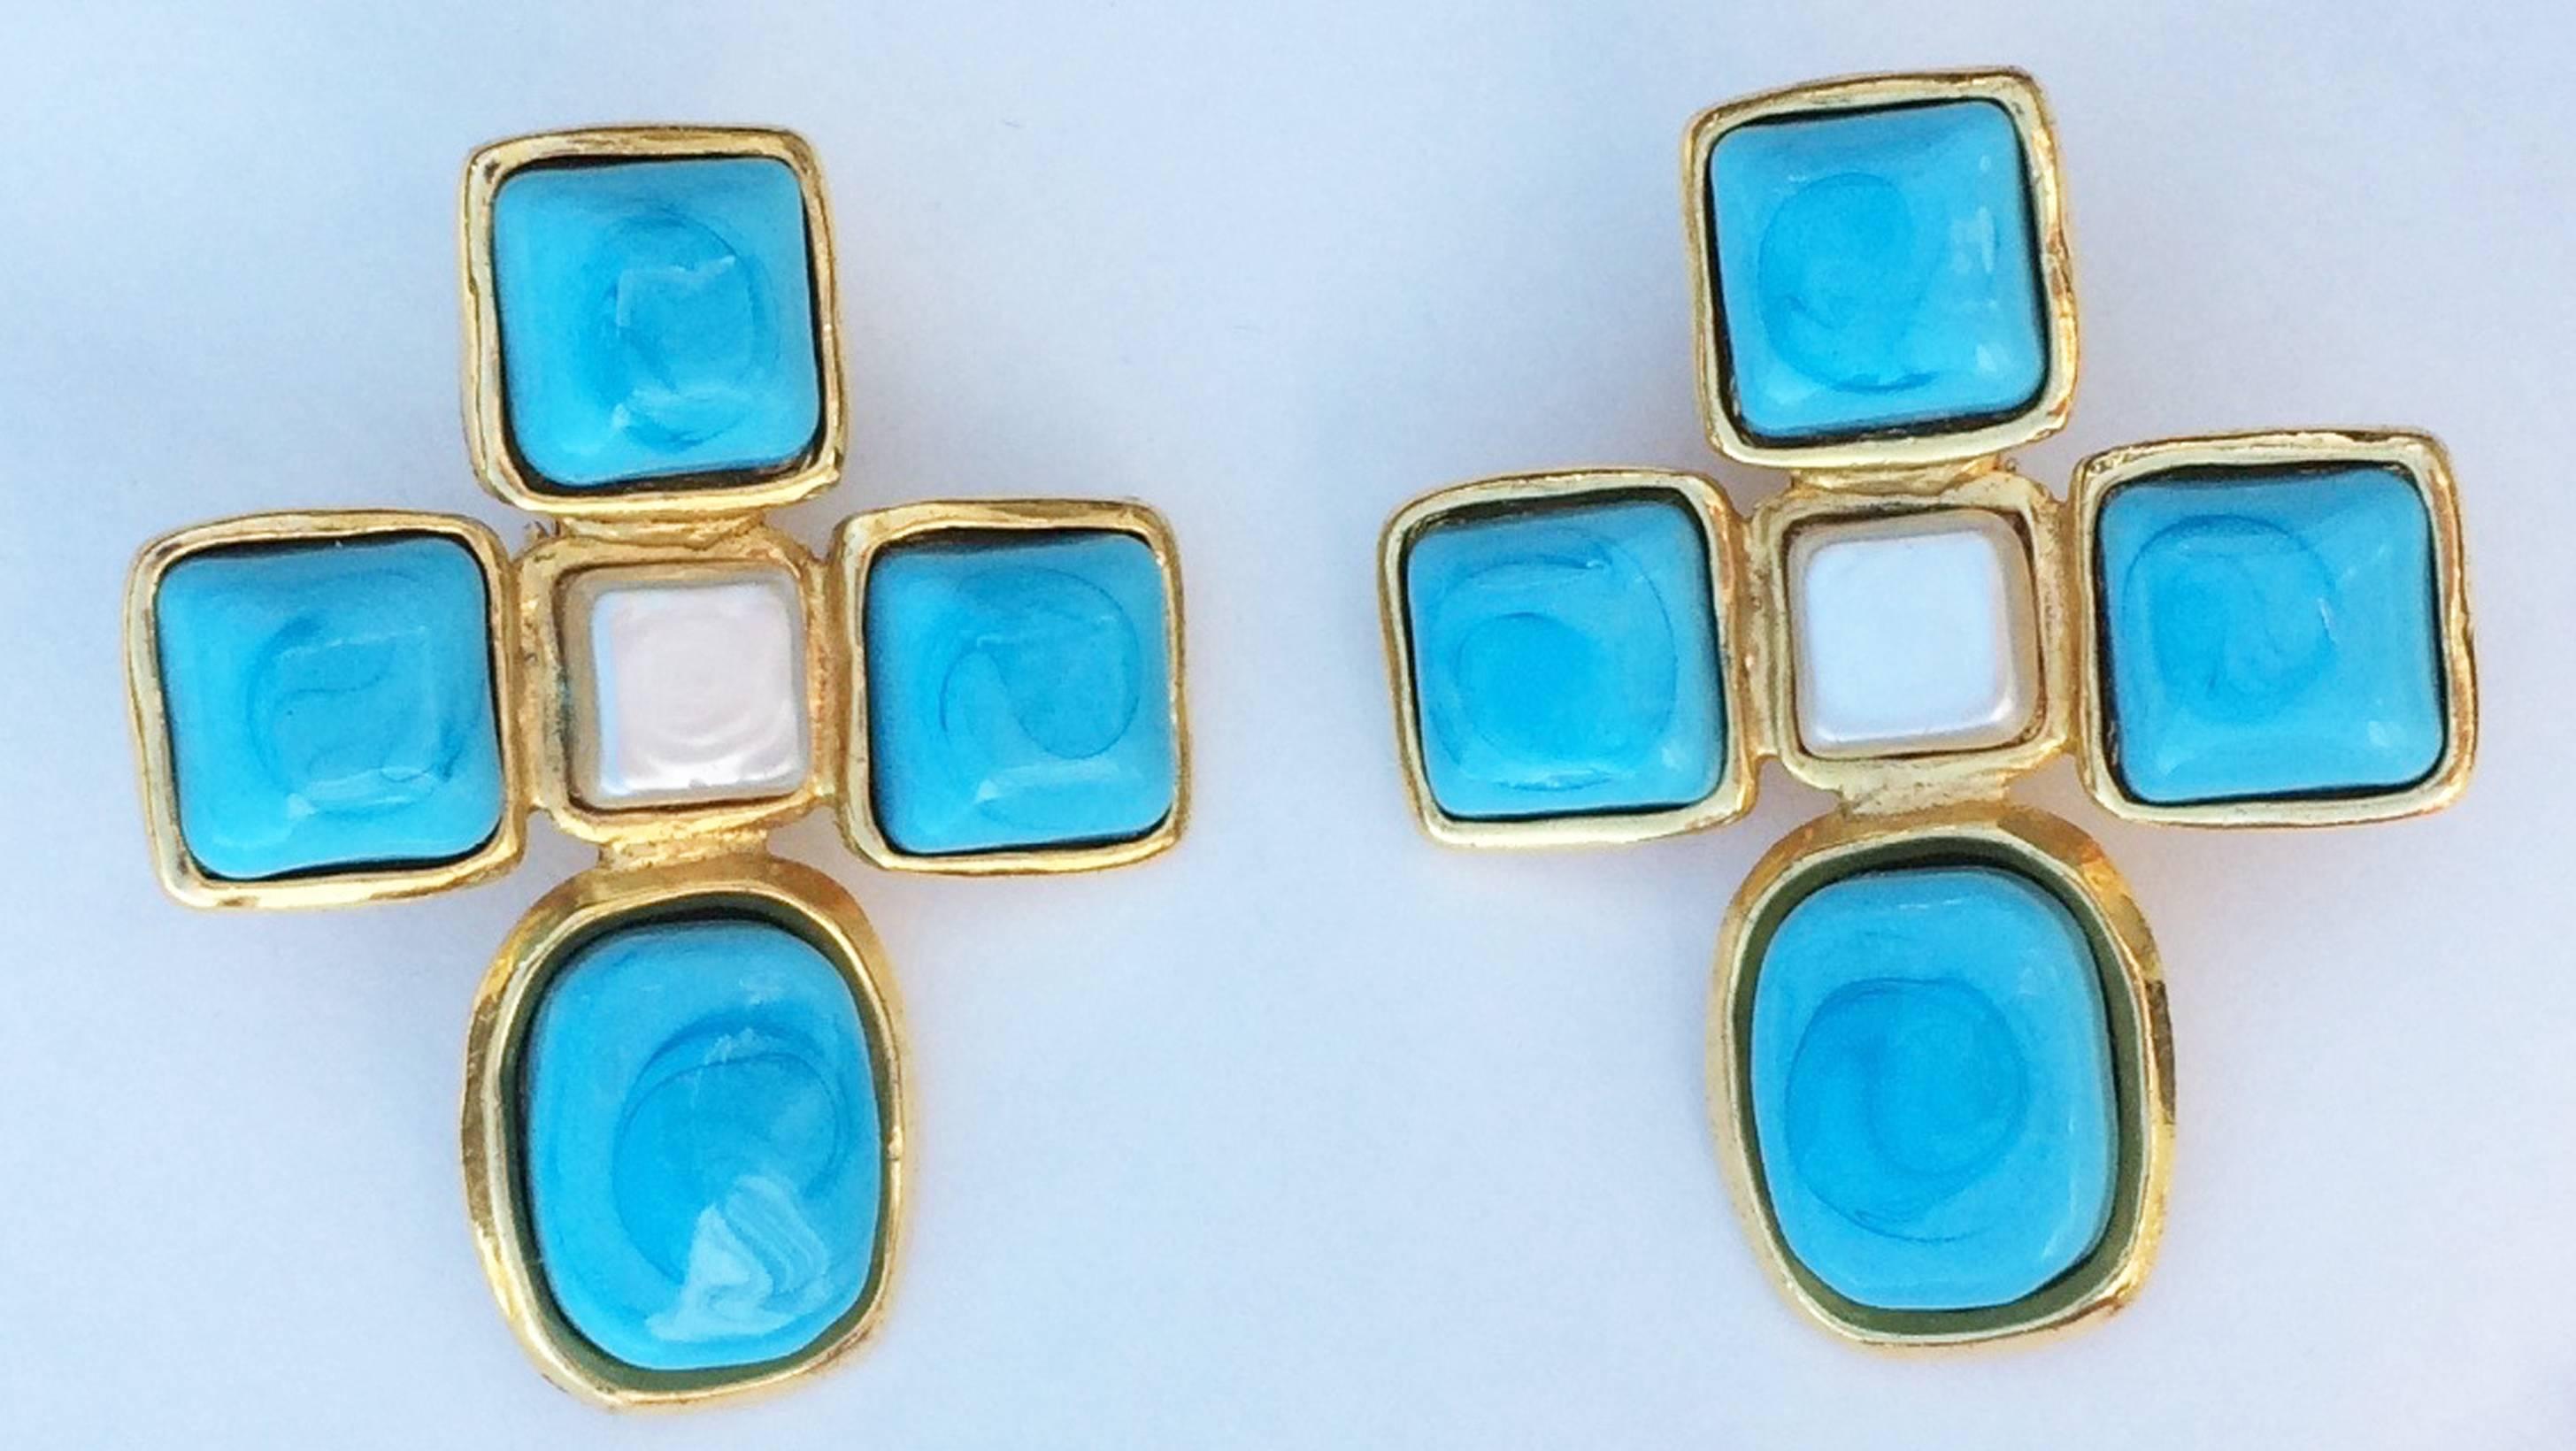 A fine vintage pair Chanel ear clips. Signed gilt metal items feature faux pearl centers and vibrant turquoise blue Maison Gripoix poured glass 